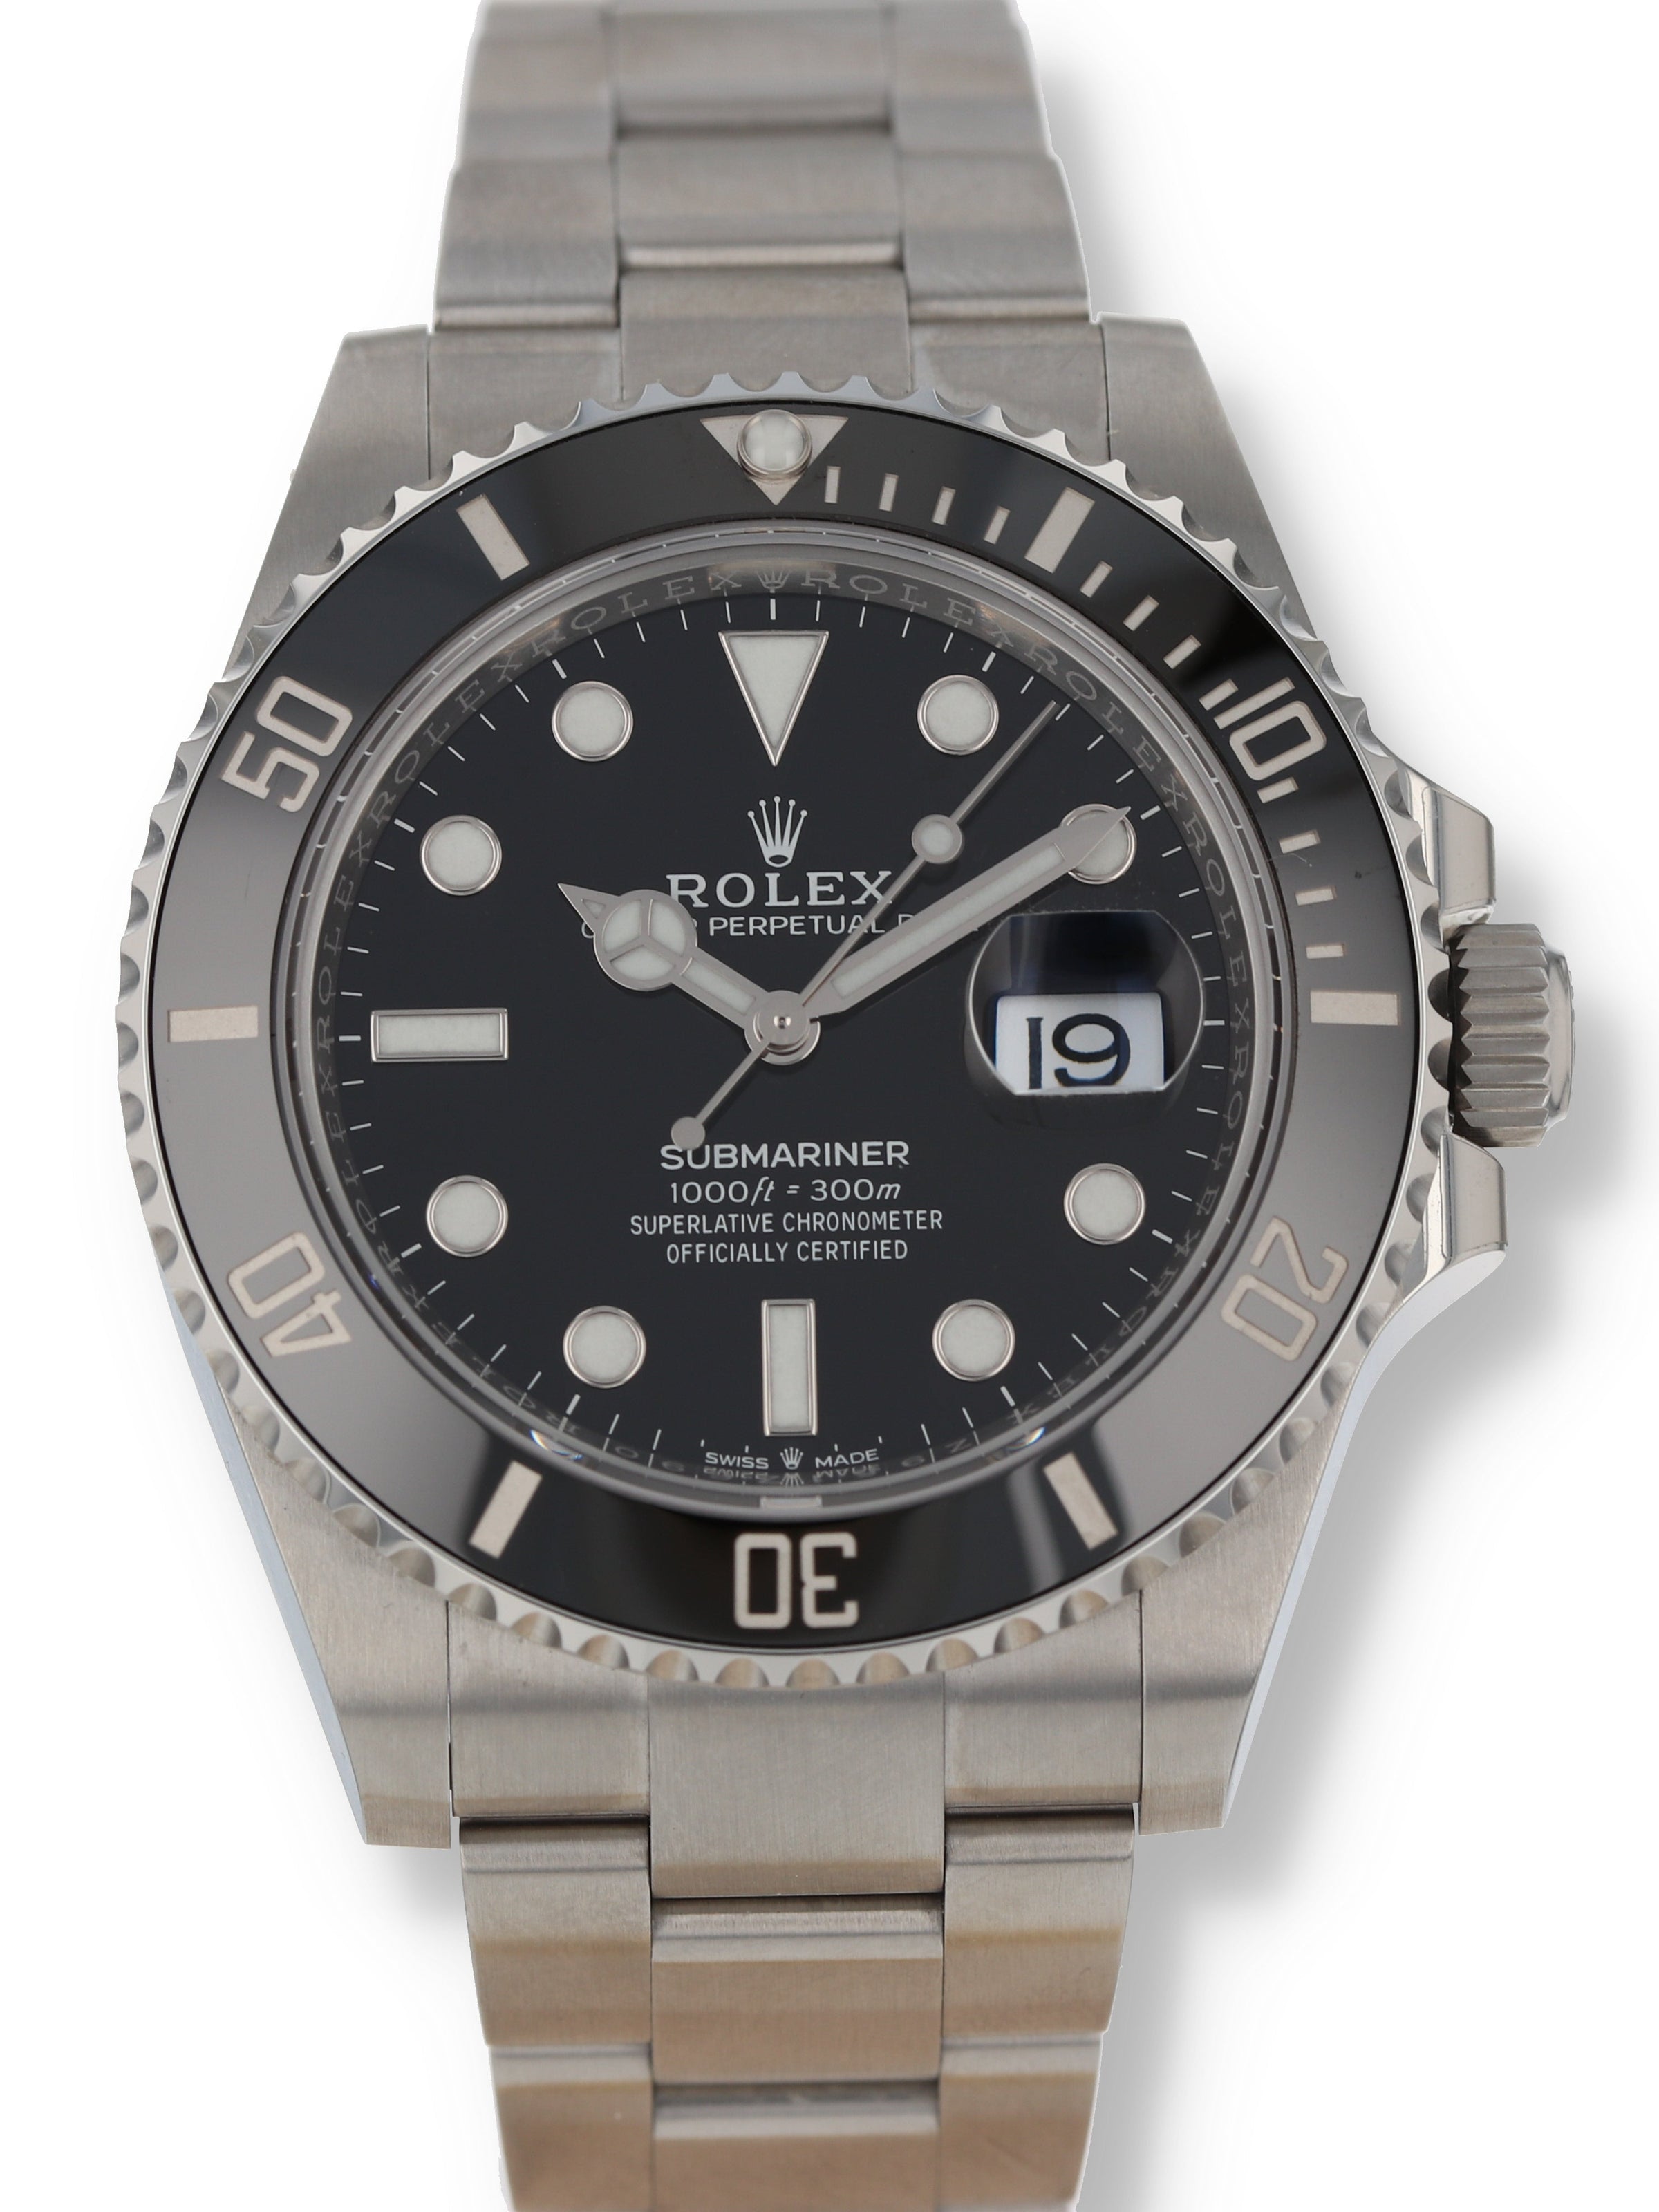 The New Rolex Submariner 41 MM (Price, Pictures and Specifications)